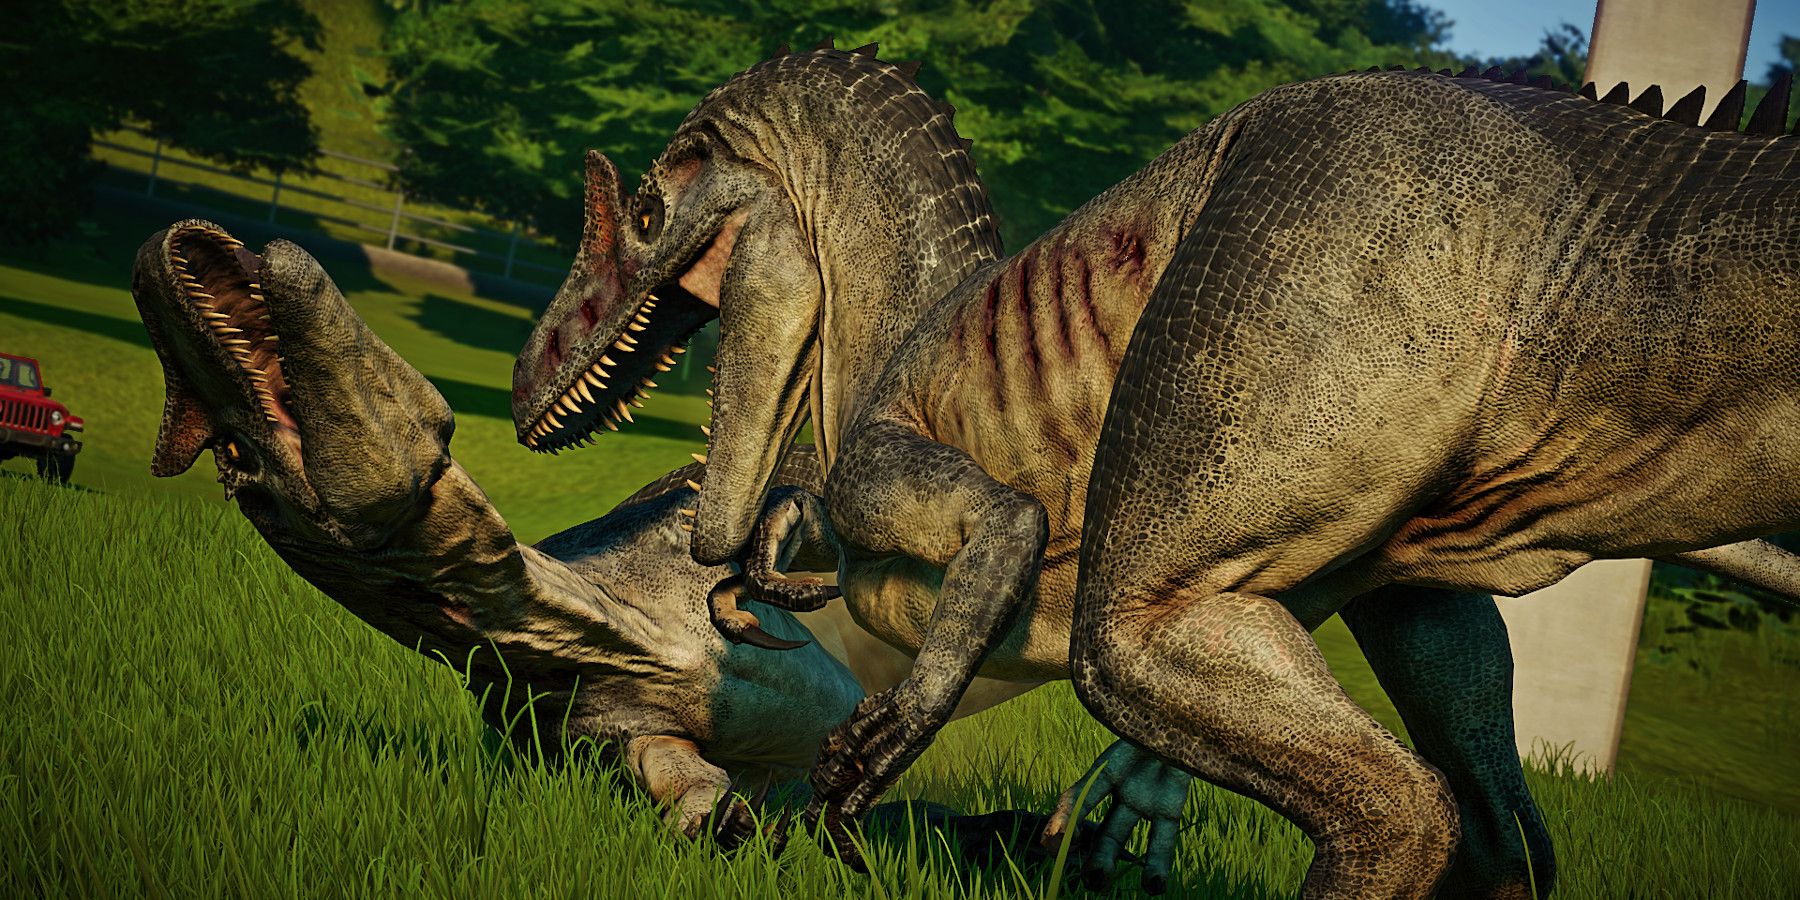 jwe2 ensure the allosaurus is safely enclosed